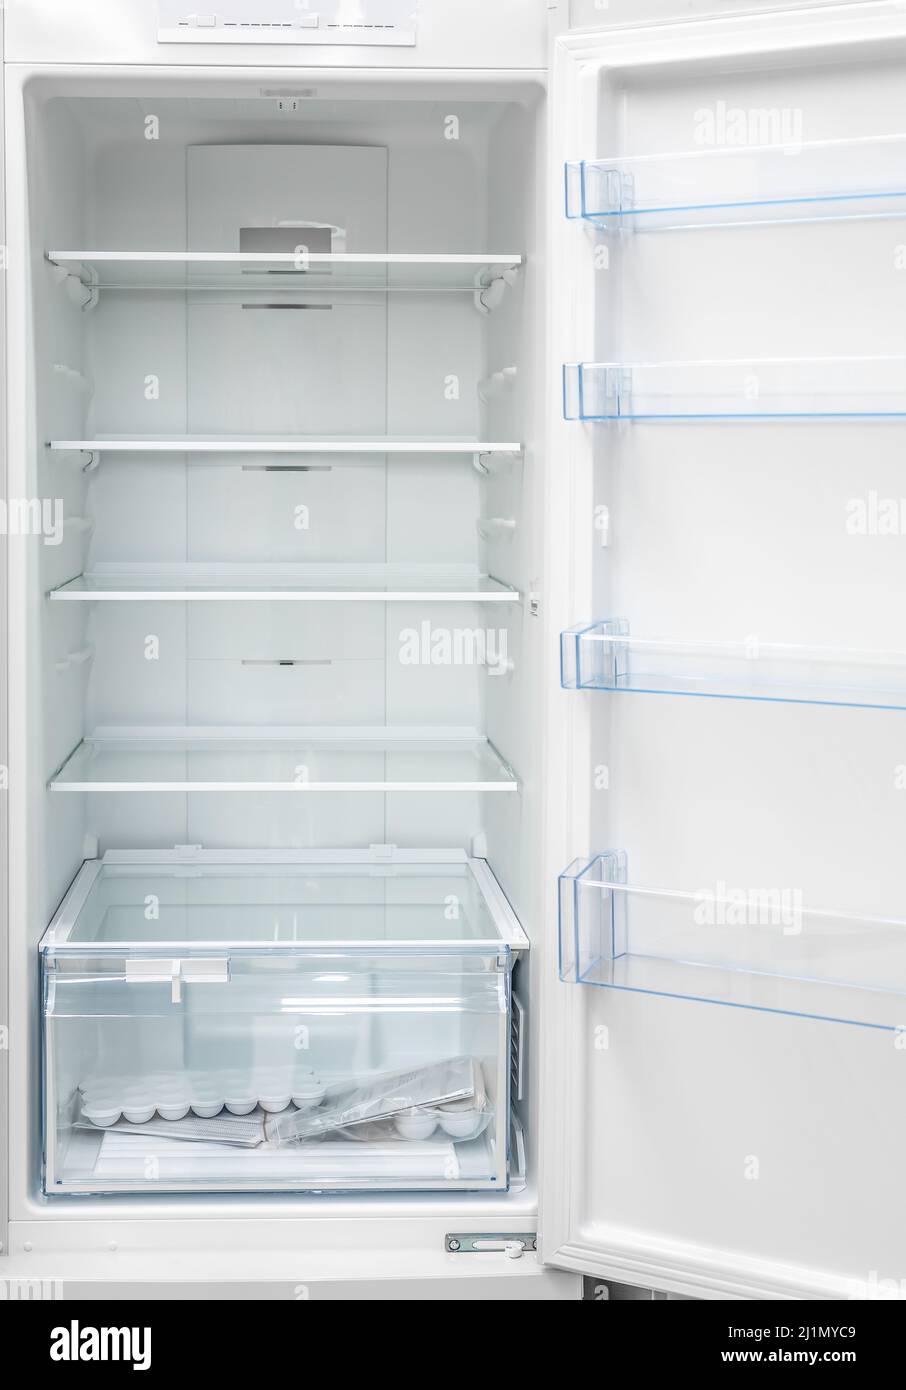 New clean refrigerator. Opened empty refrigerator. Refrigerator open empty fridge inside interior. close up on empty freezer with door open. empty she Stock Photo